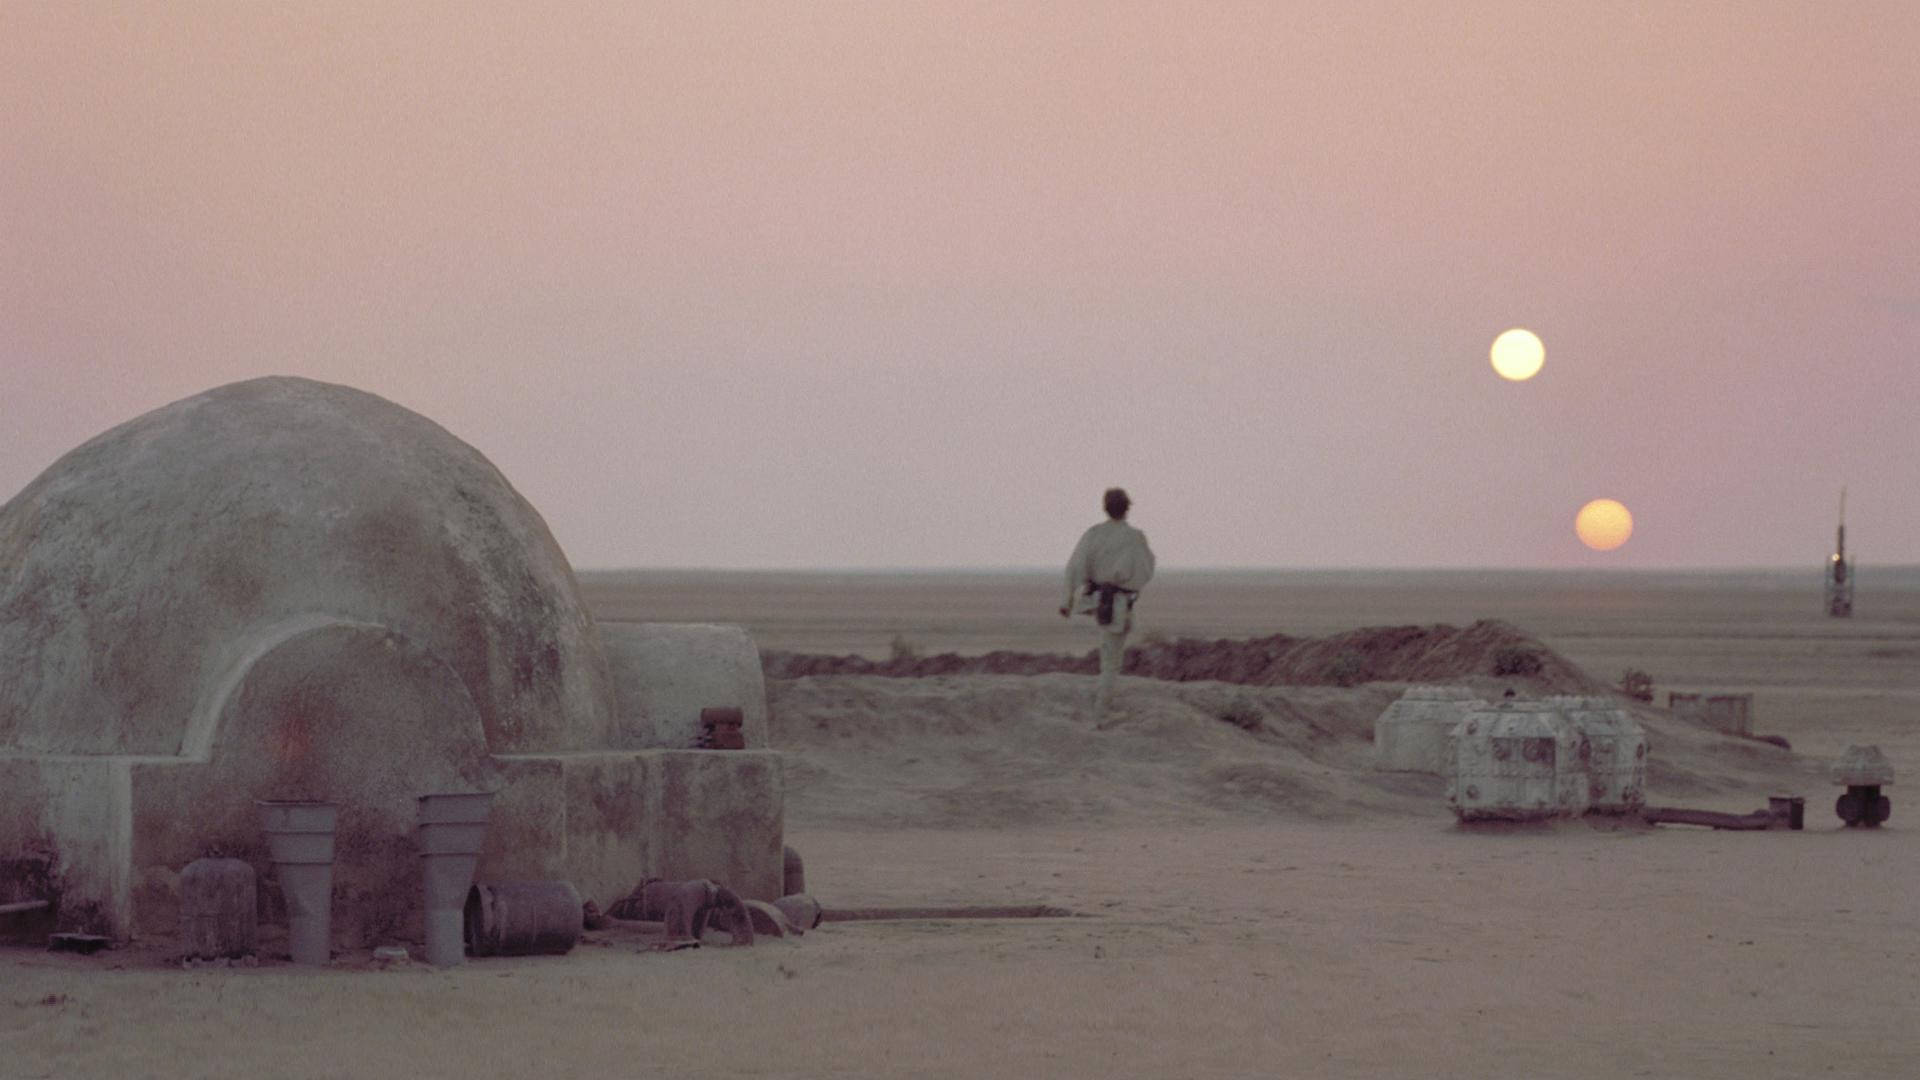 "Explore the Insanely Detailed Landscapes of Star Wars" Wallpaper